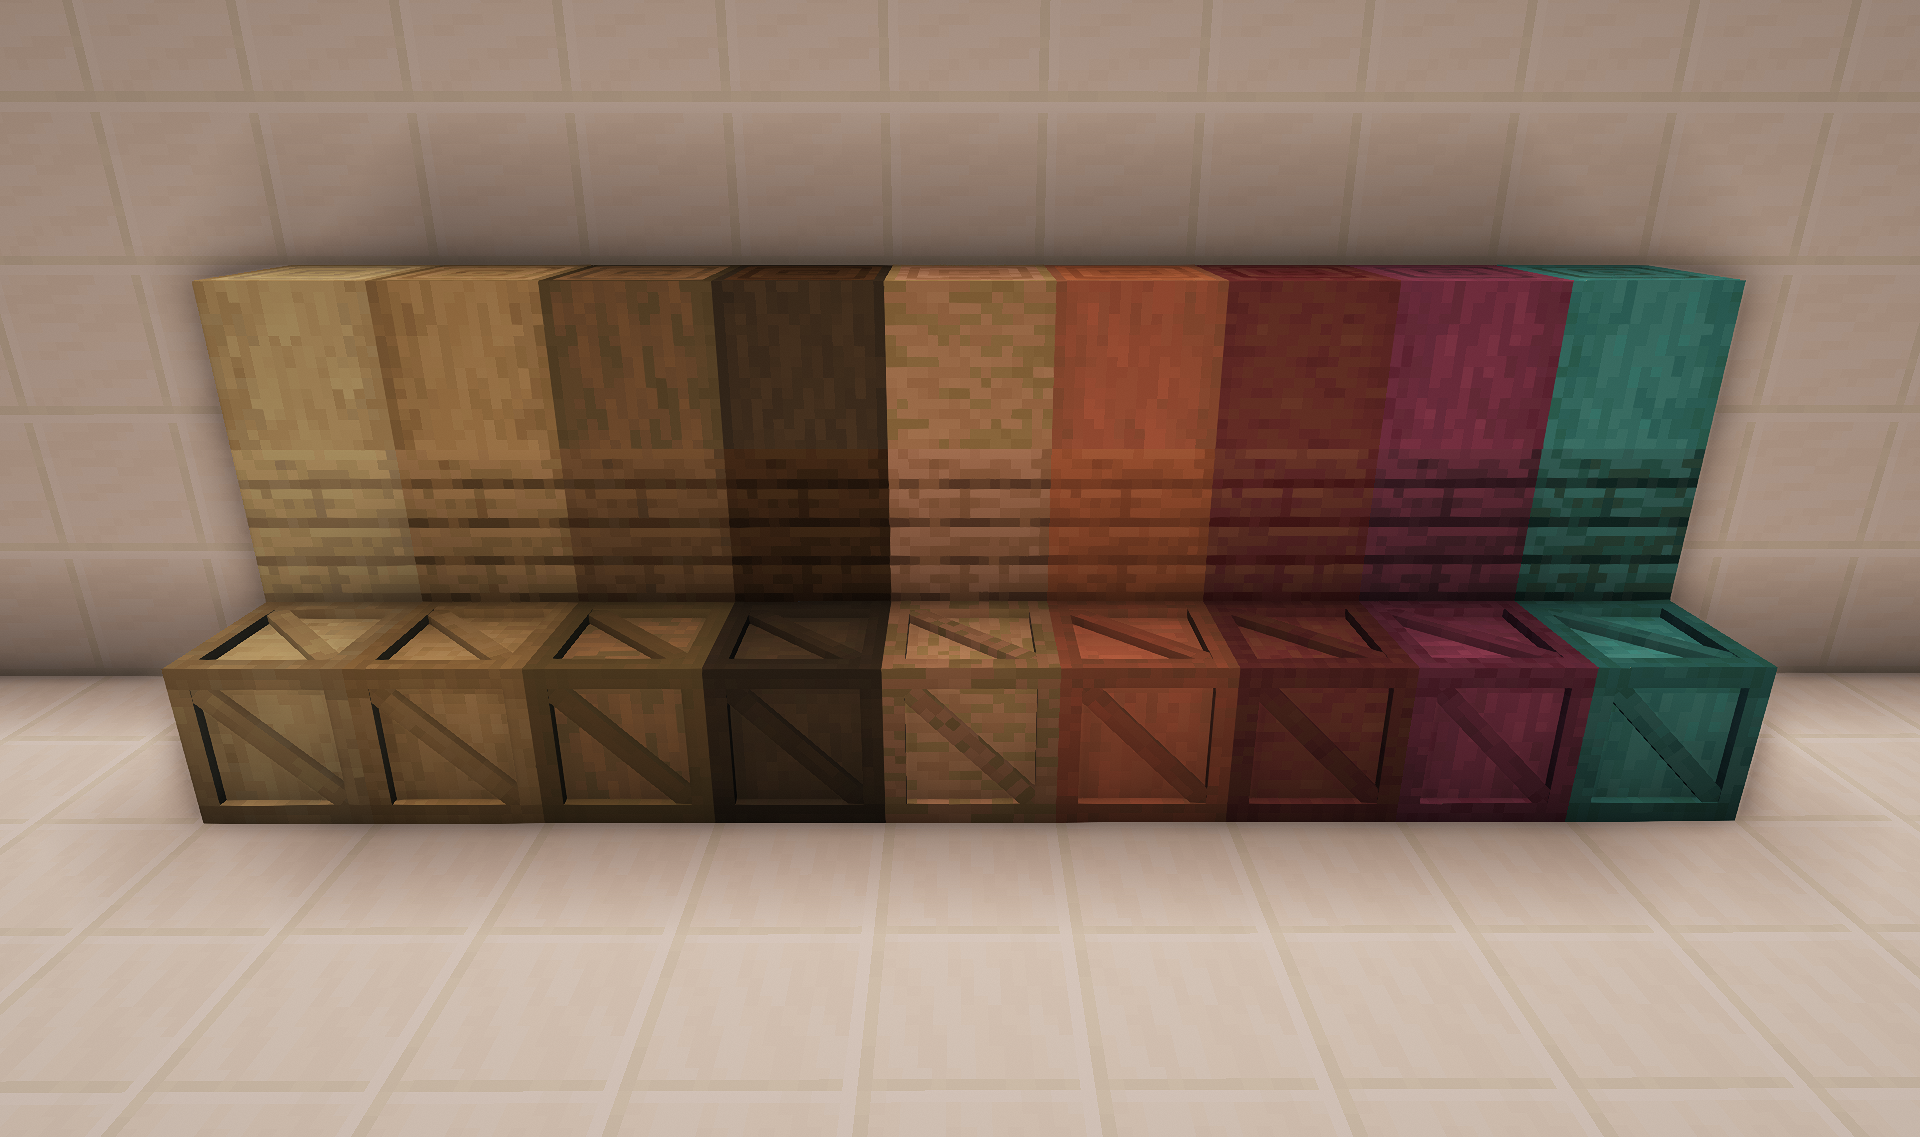 All of the crates compared to vanilla wood textures with Prismarine Shaders.